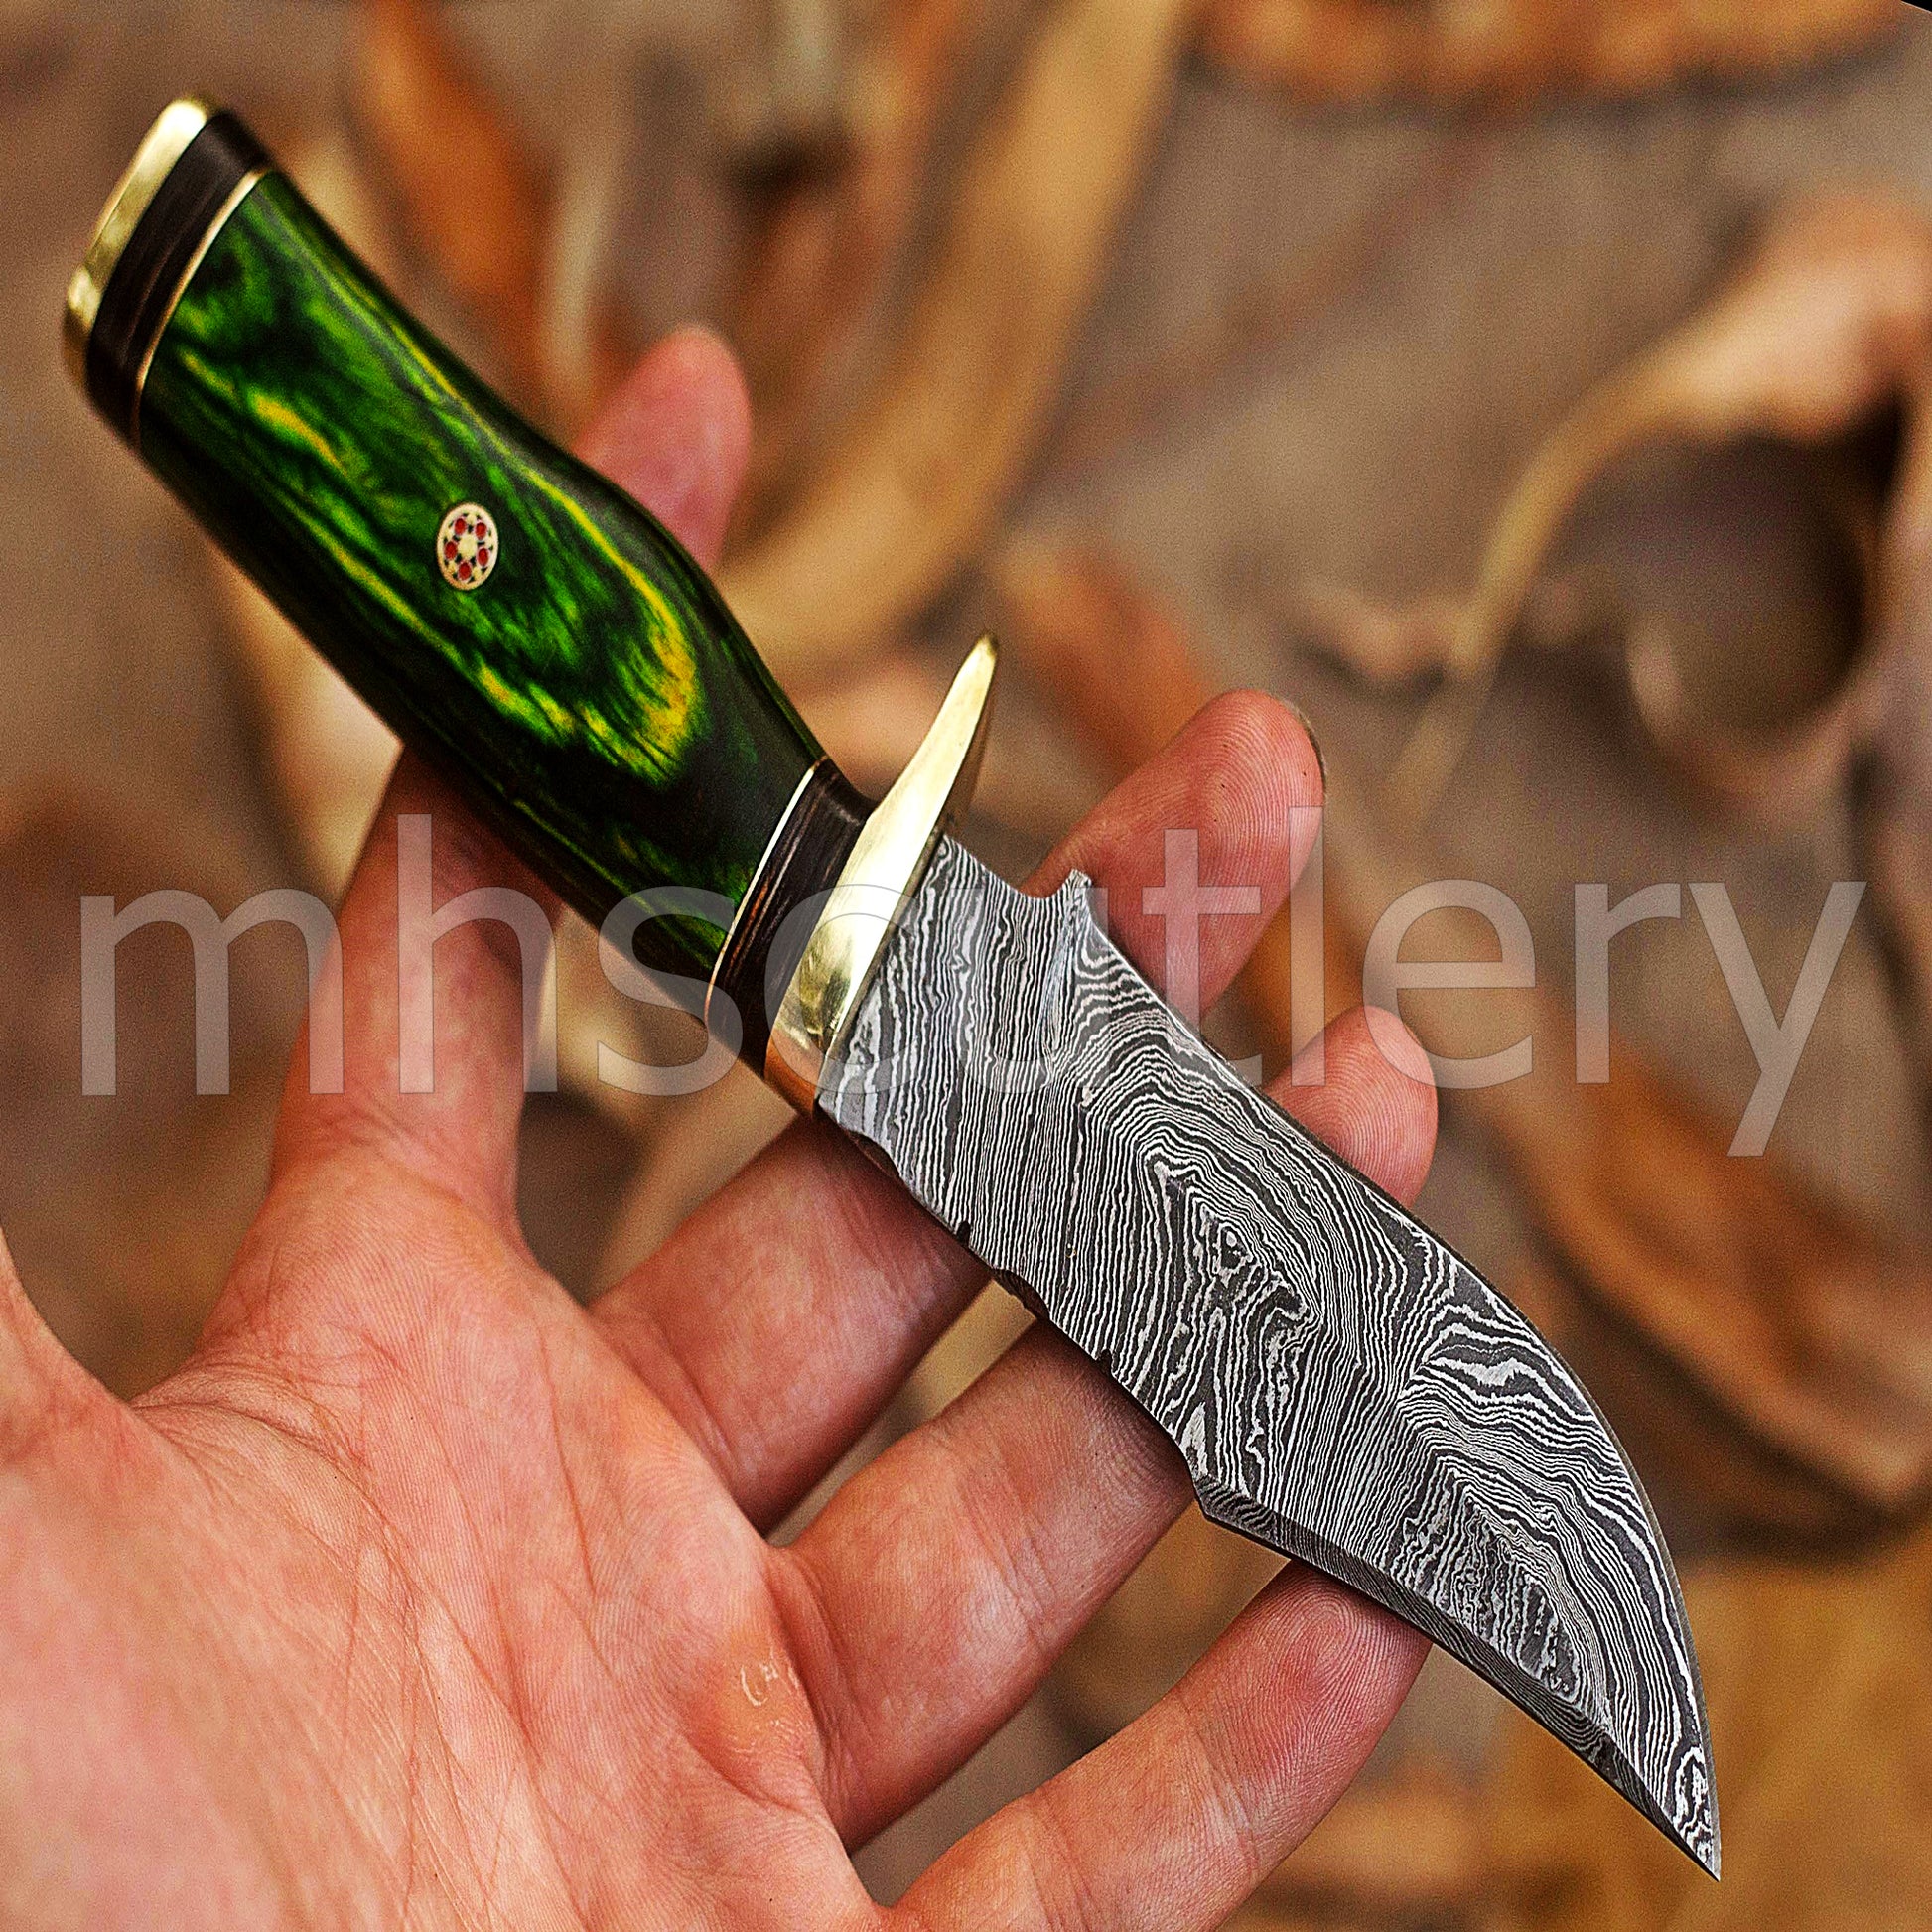 Hand Forged Damascus Steel Skinner Hunting Knife With Green Pakka Wood Handle | mhscutlery